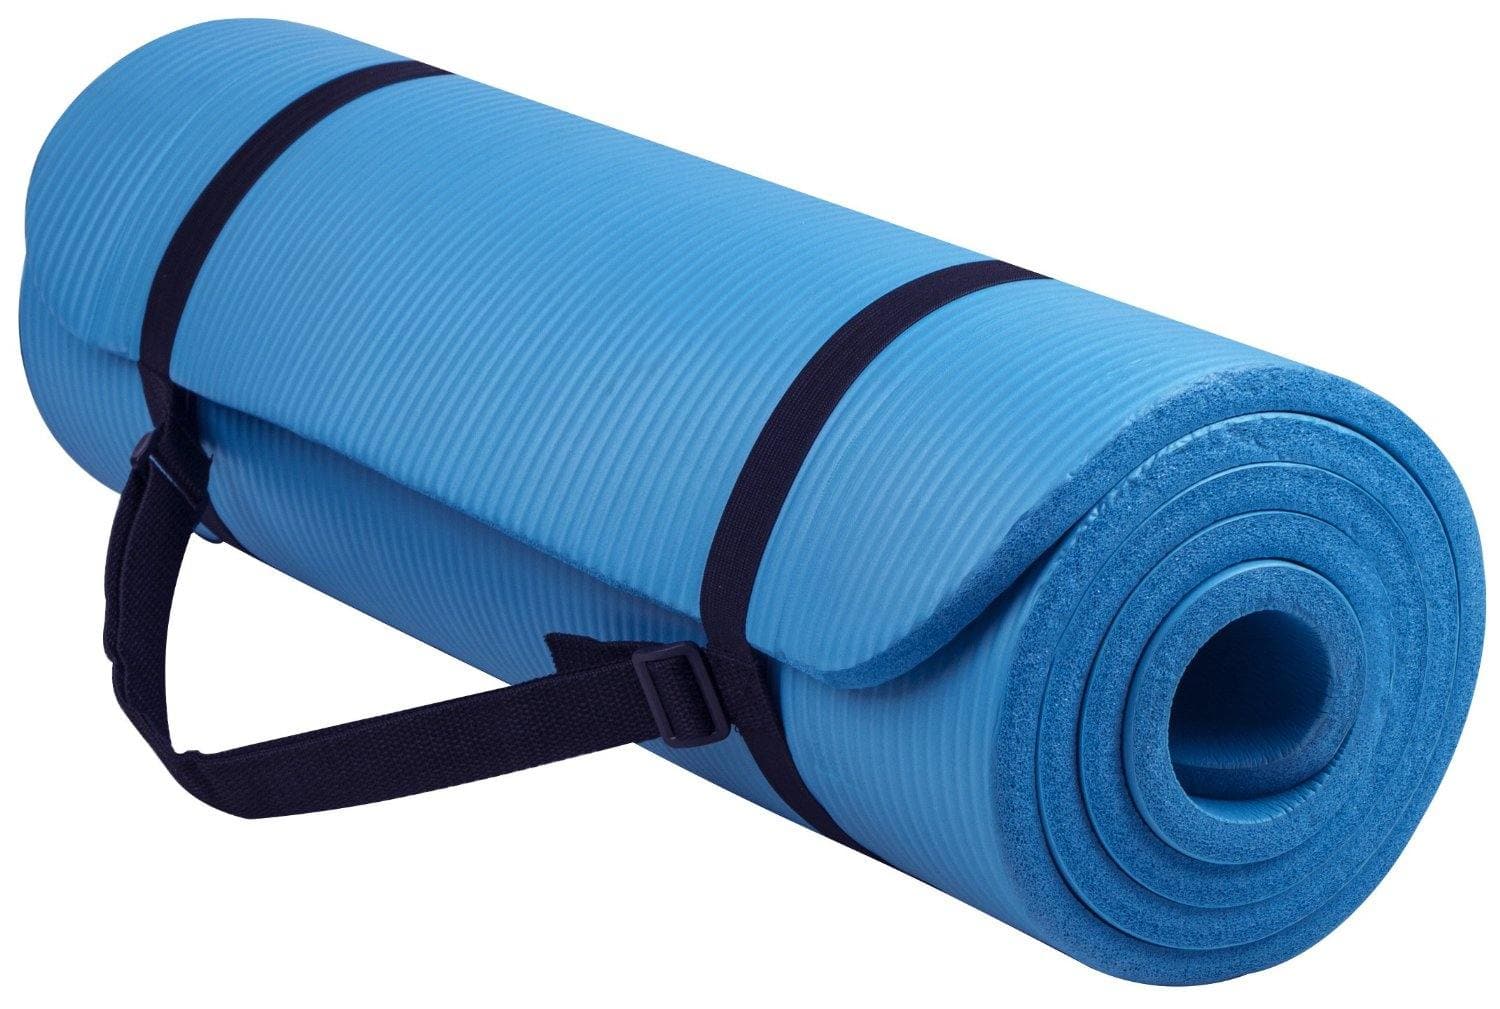 Exercise & Yoga Mat (15mm) - Blue or Red - Musclemania Fitness MegaStore